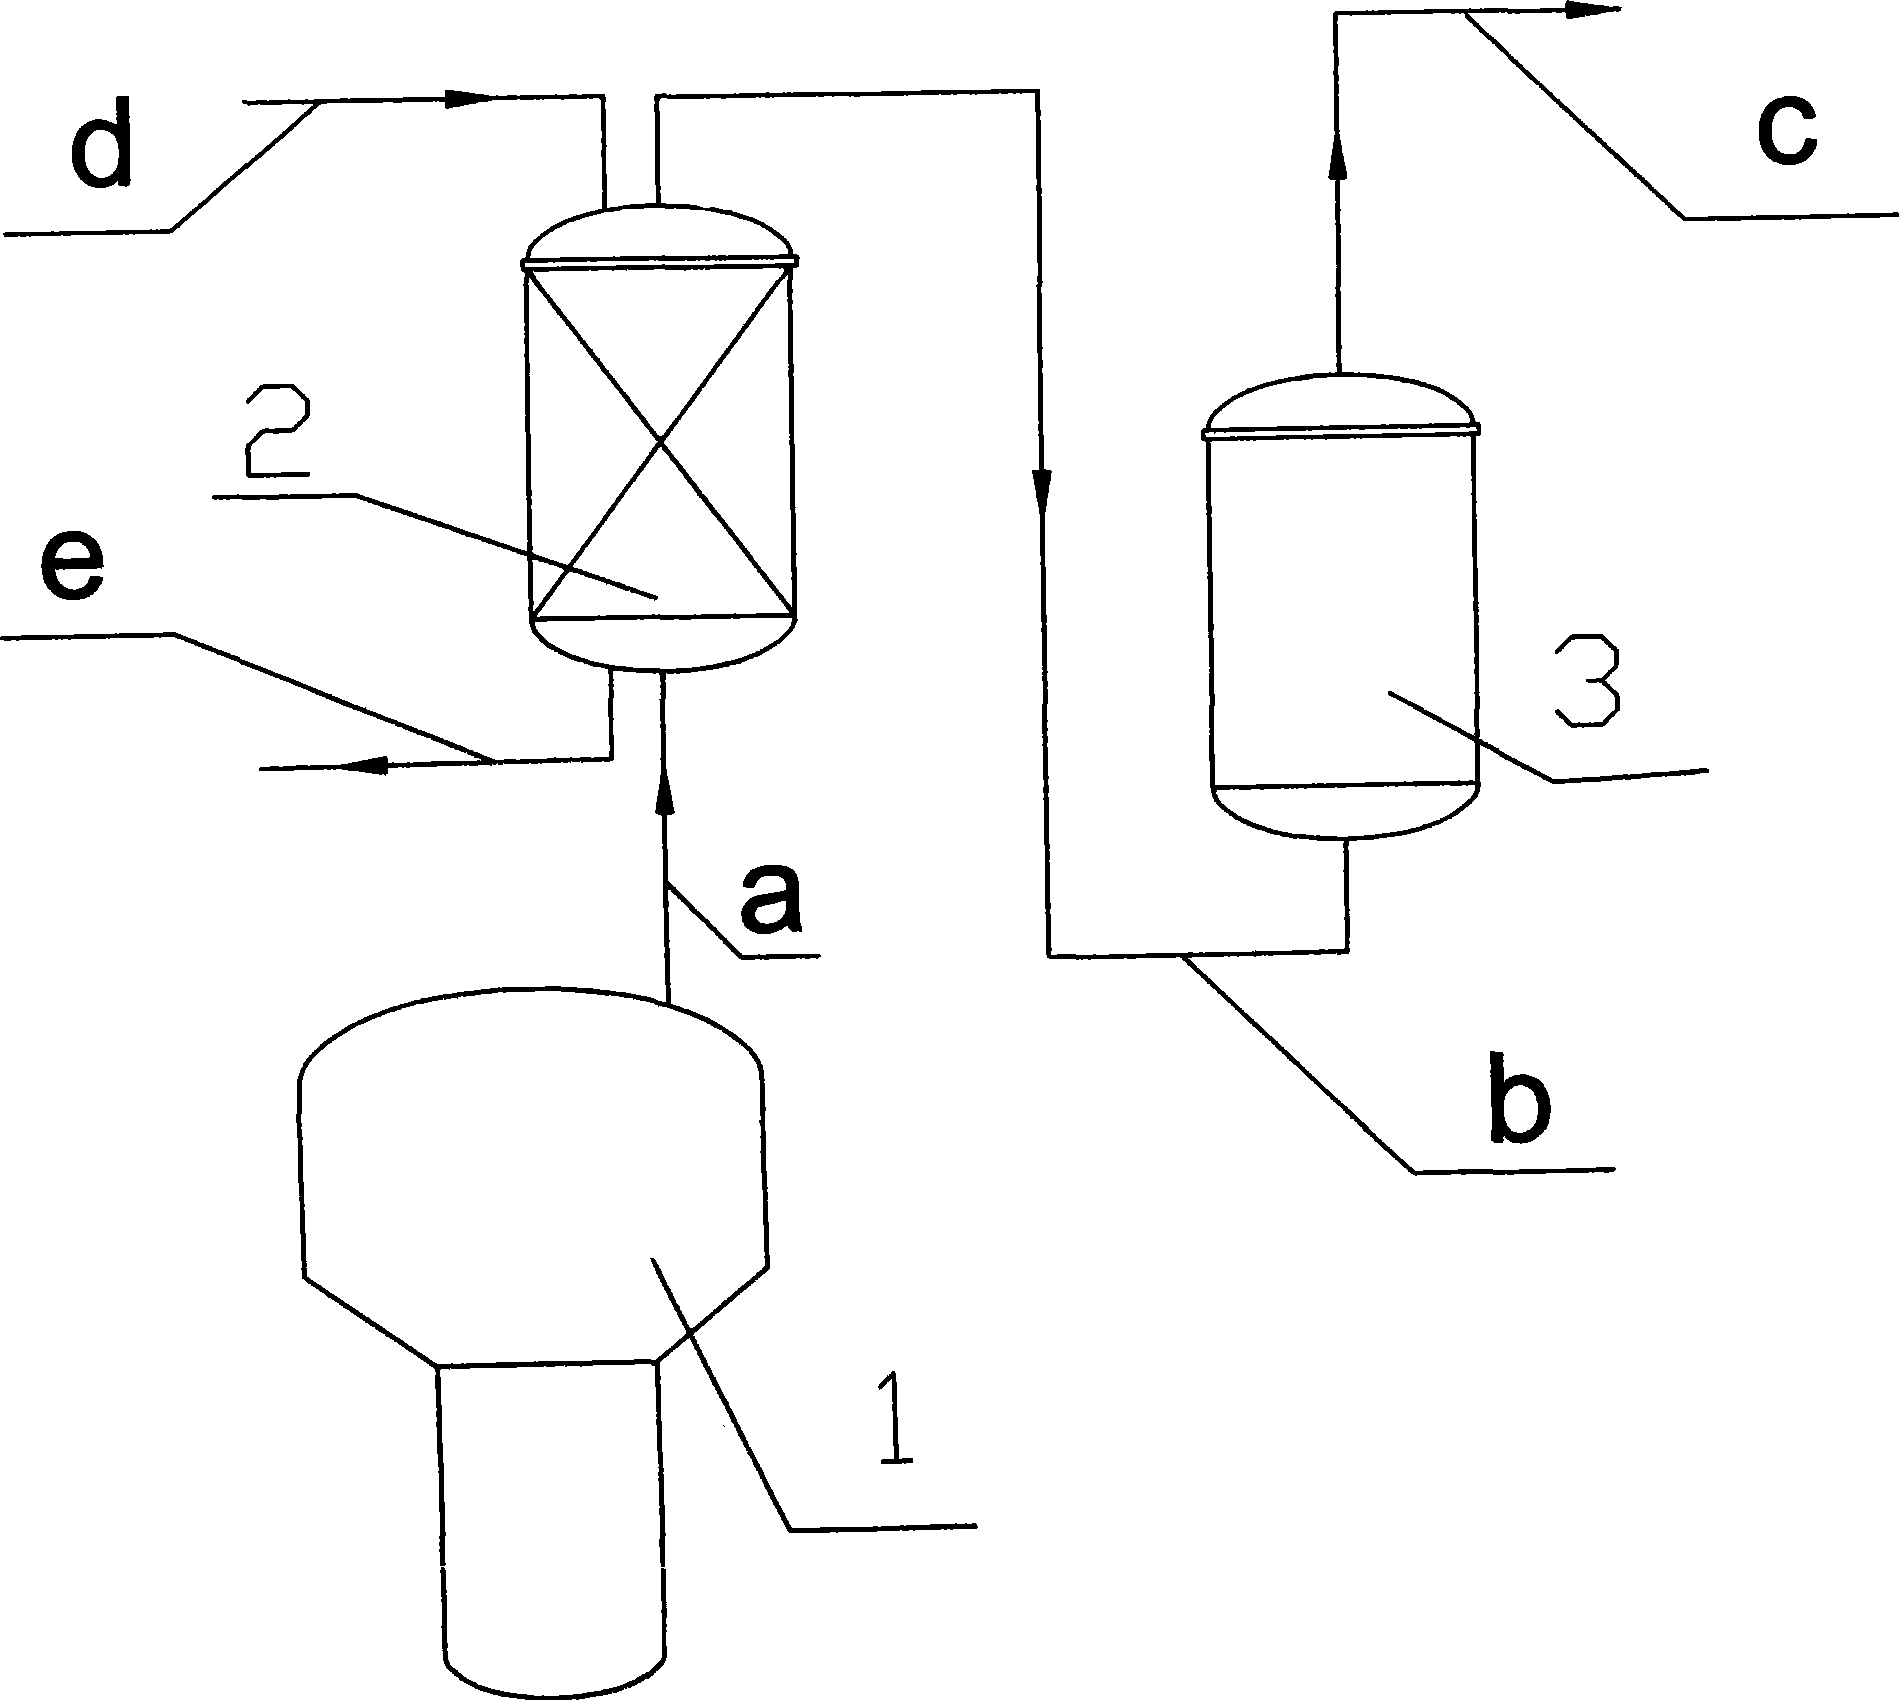 Technique for reducing impurity content in gas phase hydrogenchloride from hydrolysis of dimethyldichlorosilane